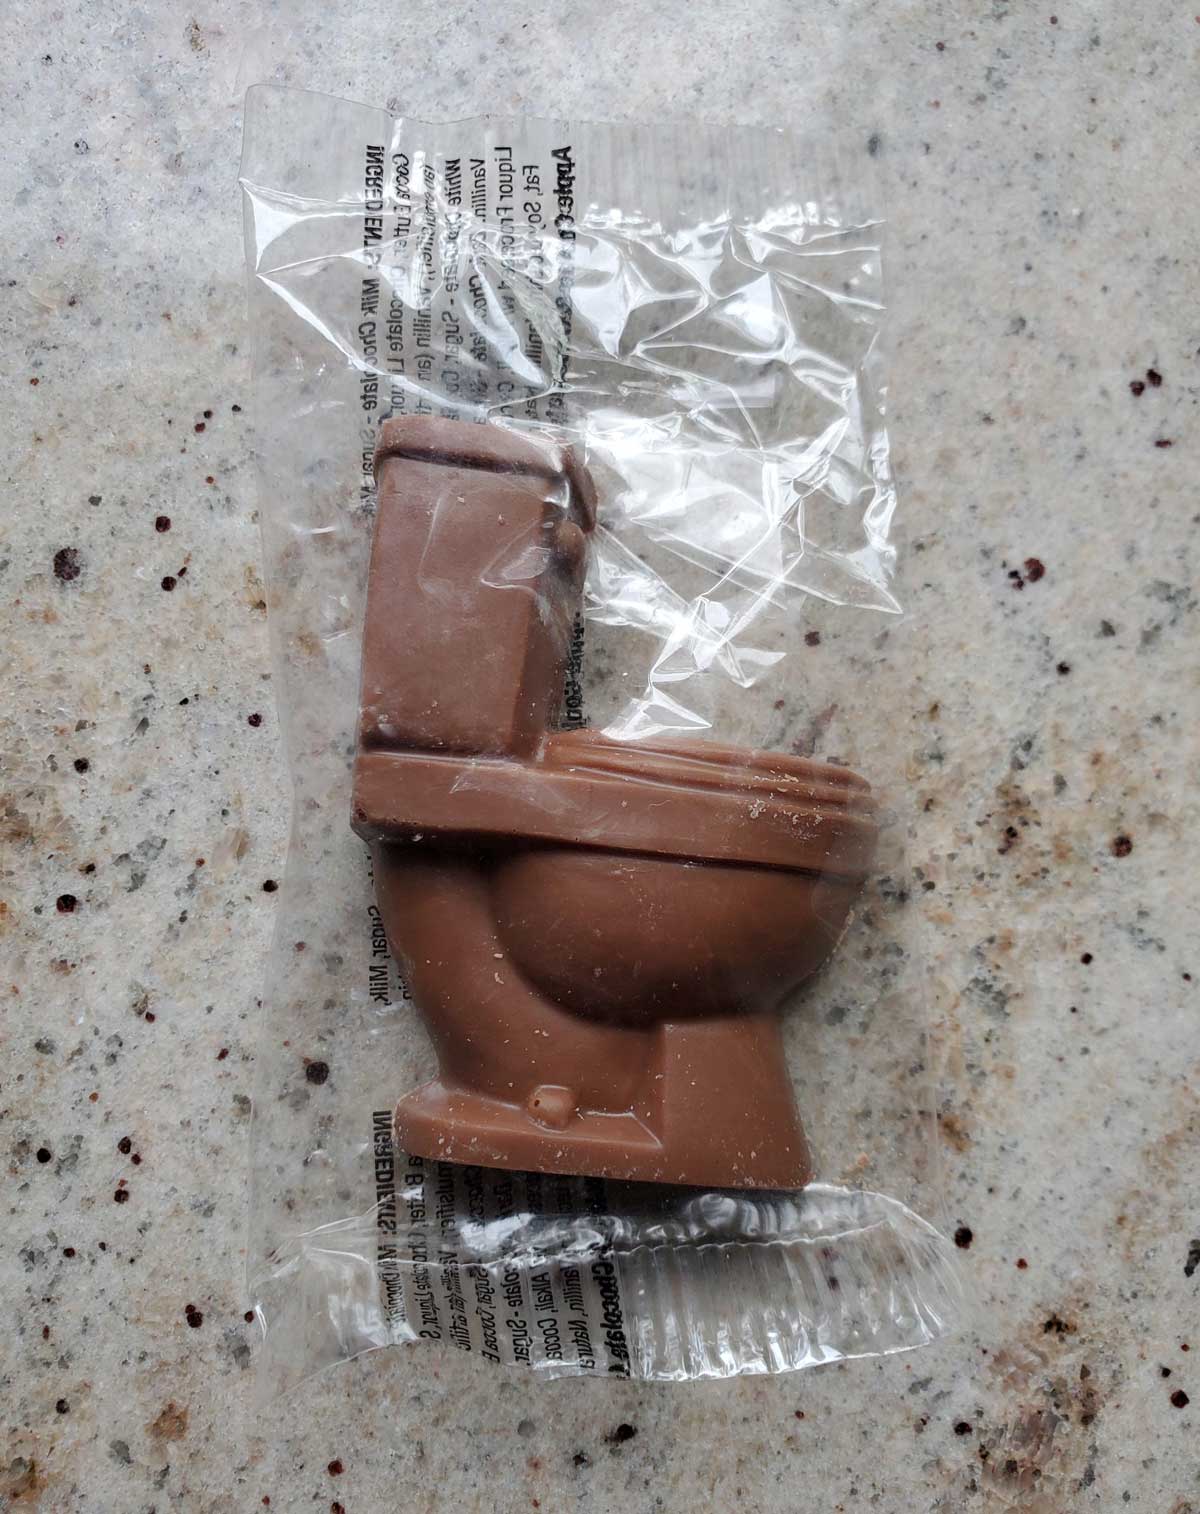 My husband is a plumber and his company sent chocolate toilets..